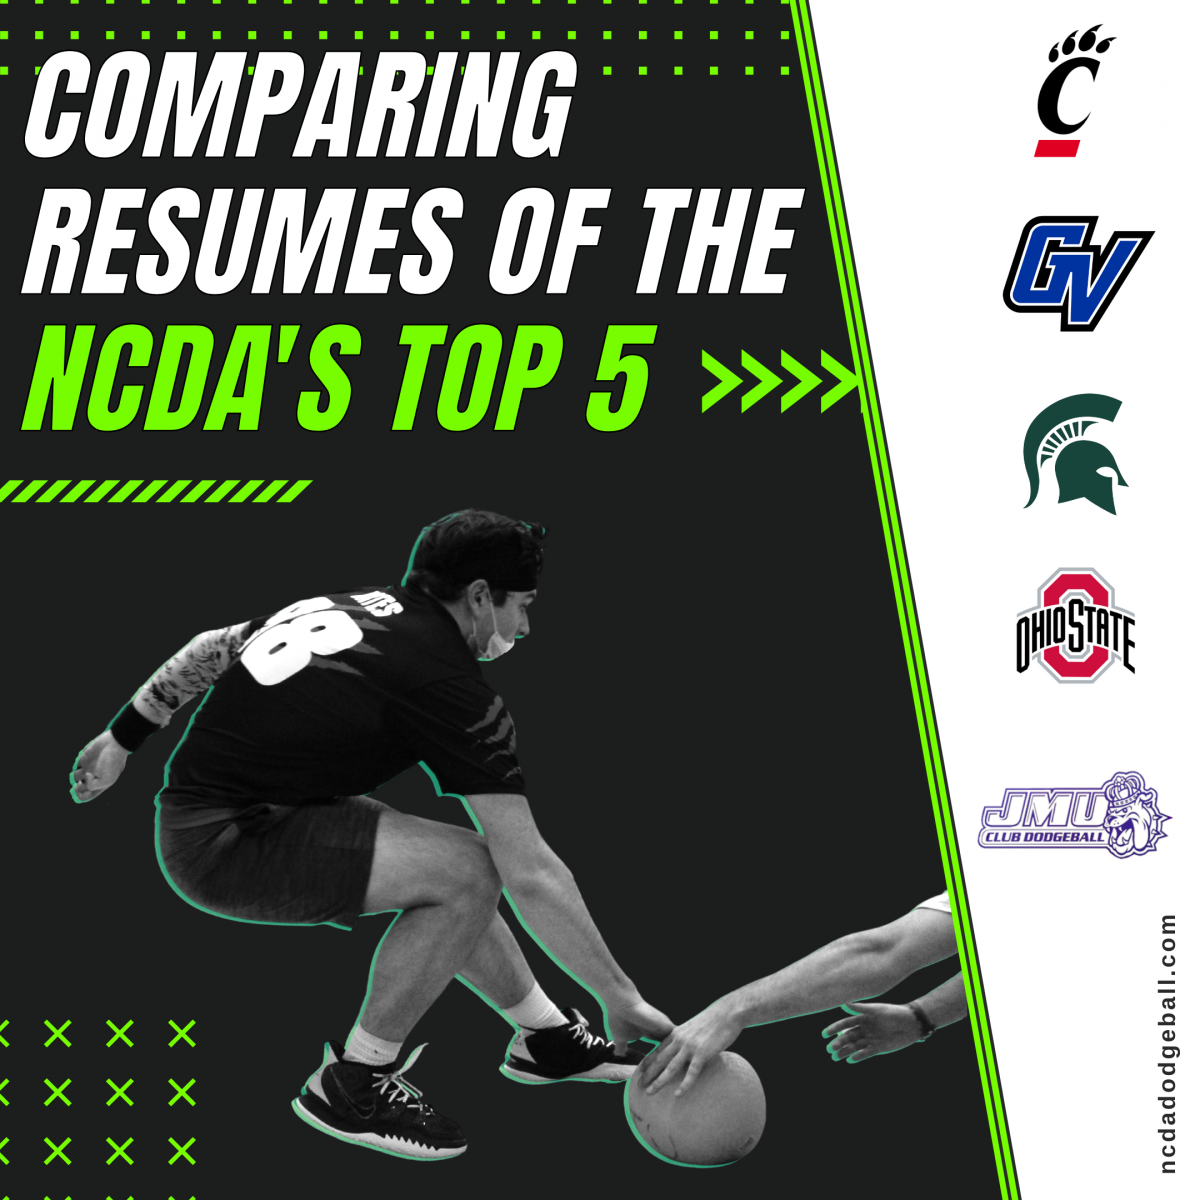 Comparing Resumes of the NCDA’s Top 5